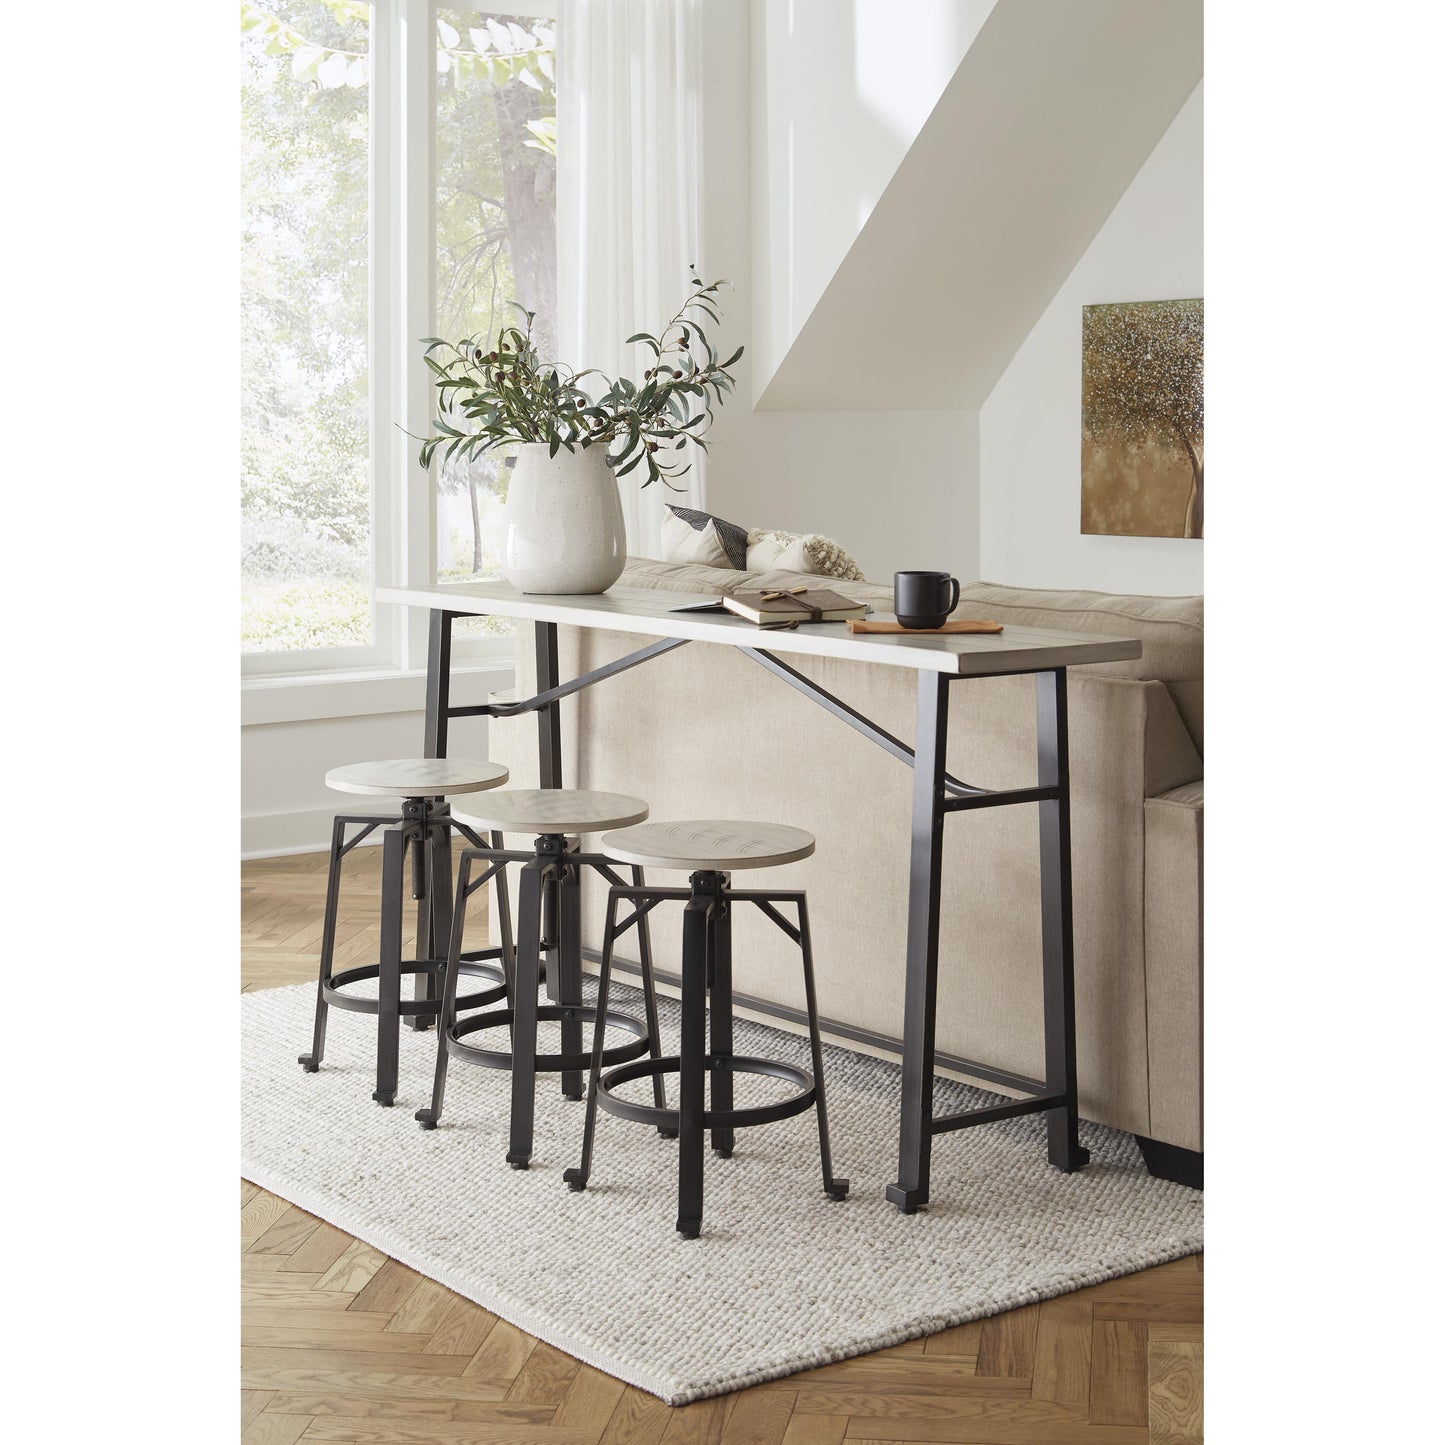 Signature Design by Ashley Karisslyn Adjustable Height Stool D336-024 IMAGE 7